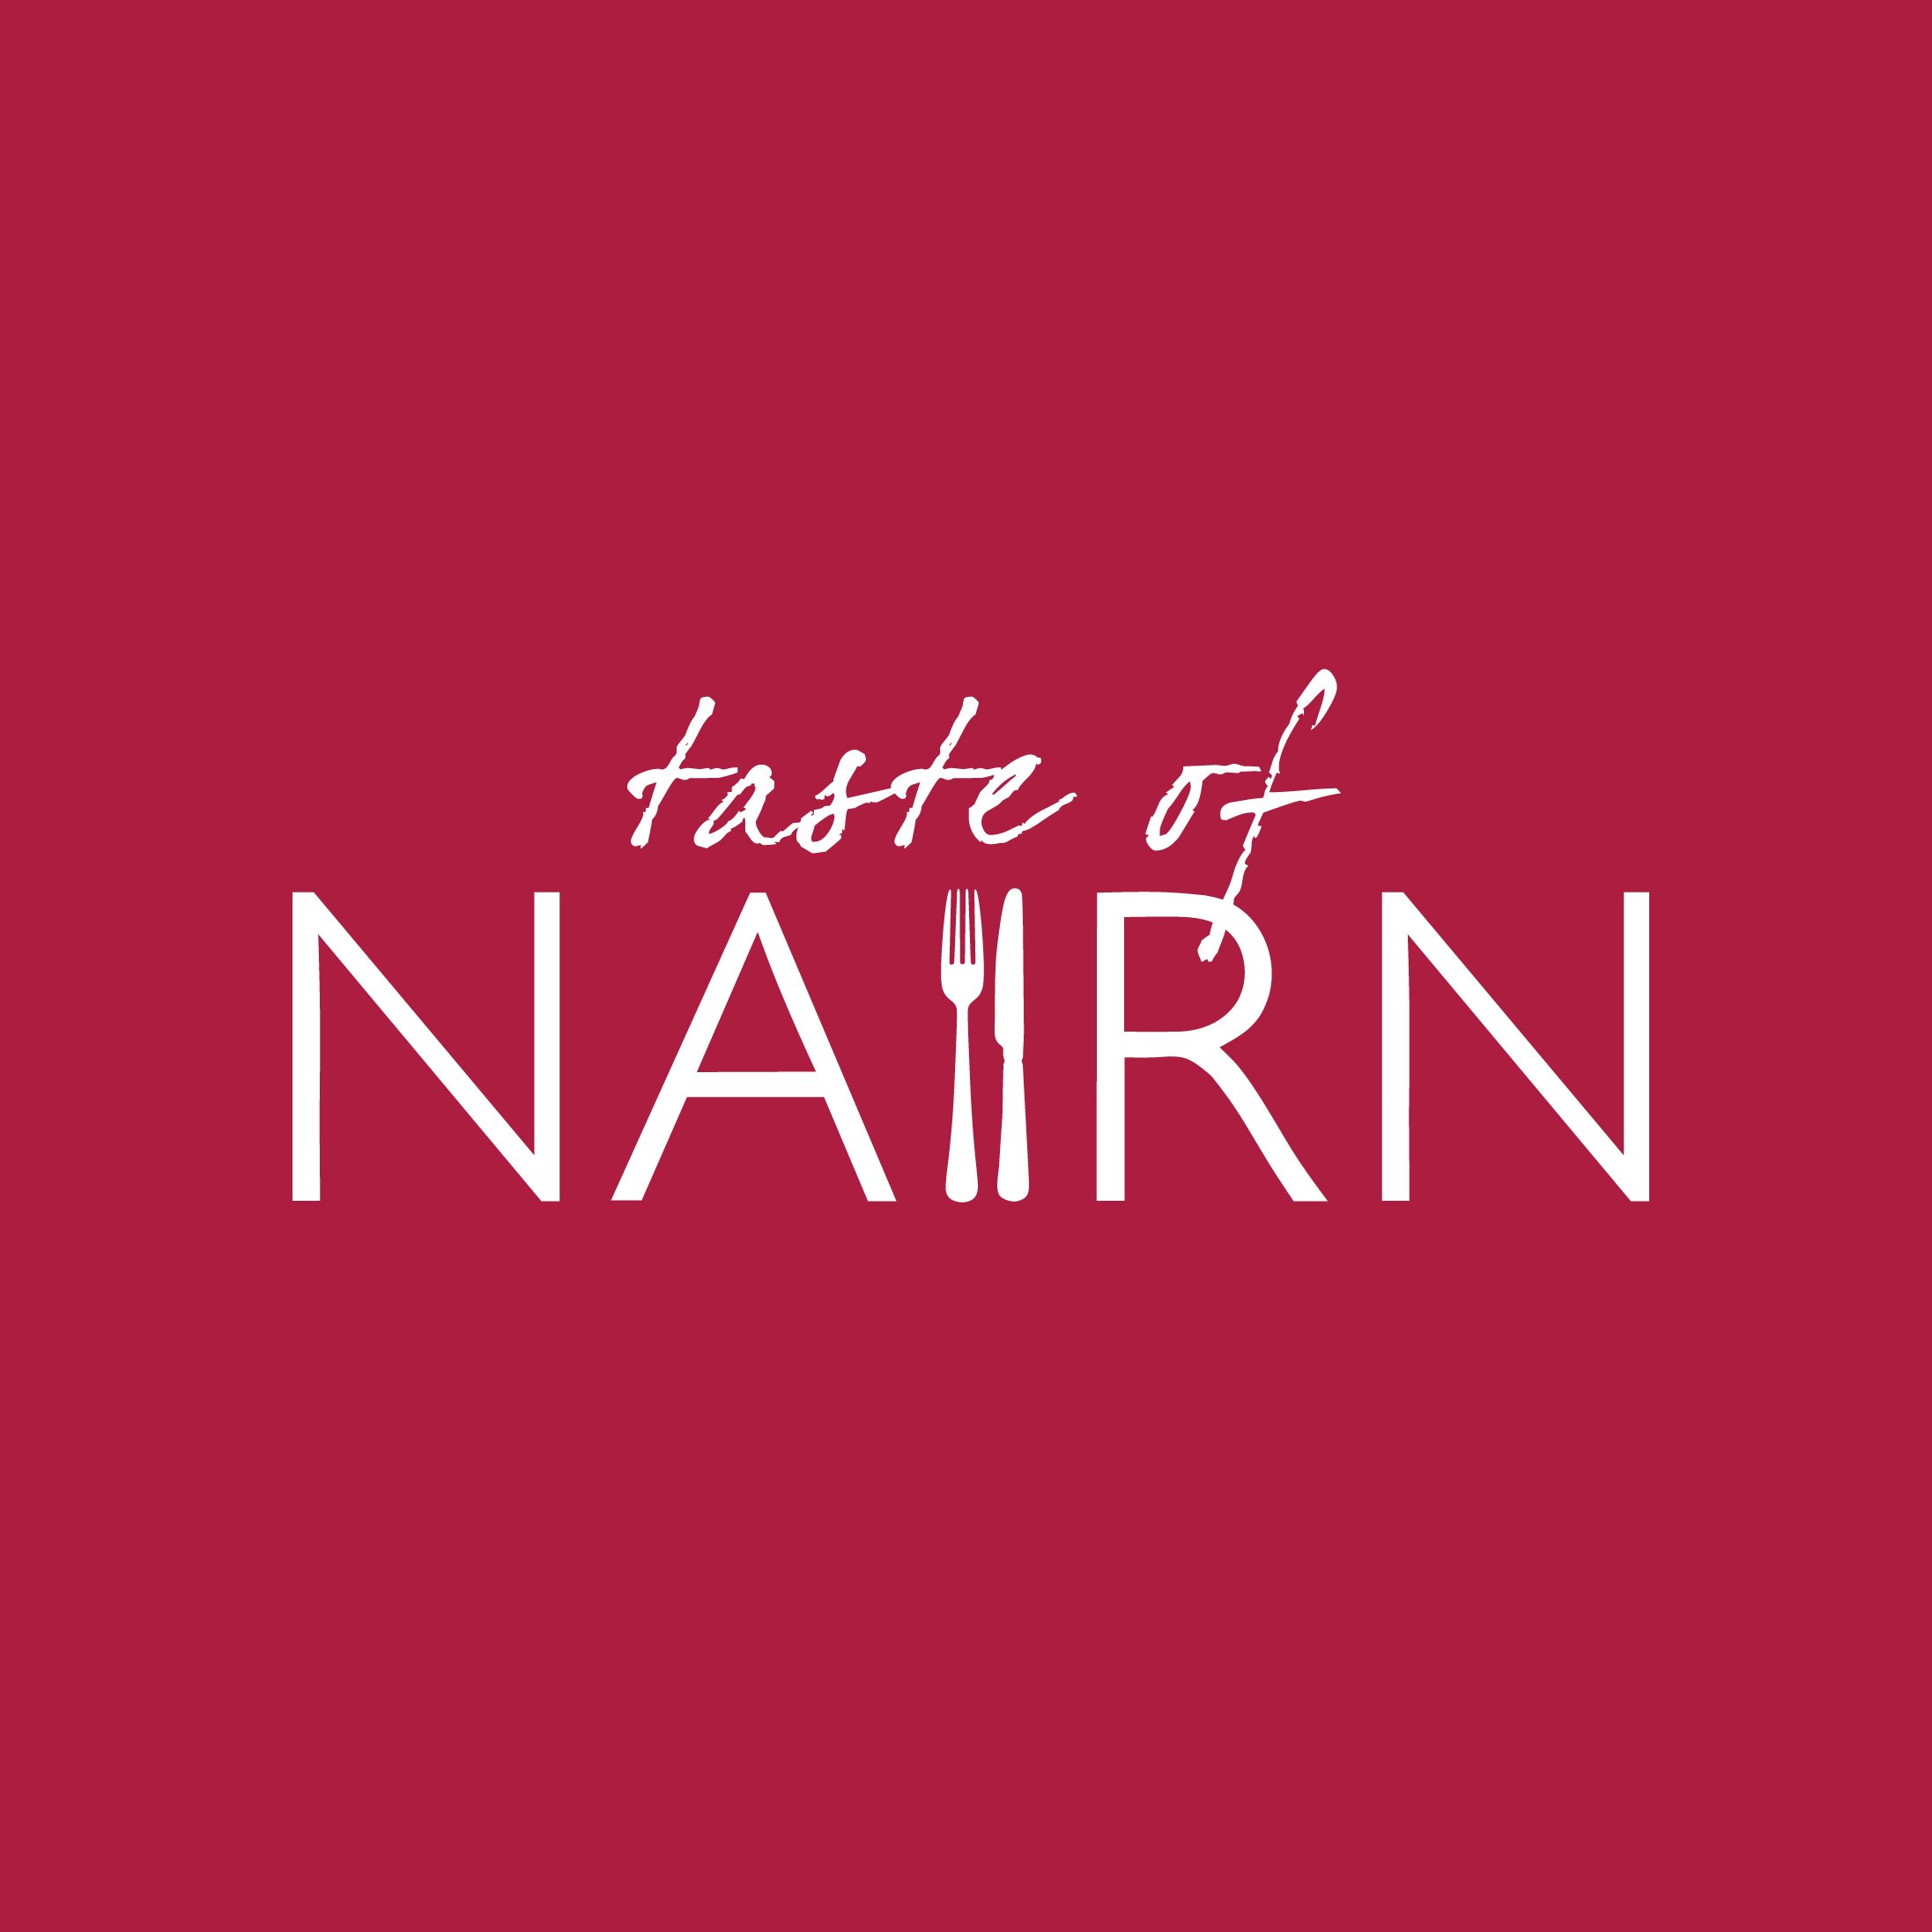 Taste of Nairn, a 3 day food & drink fest celebrating all that’s delish about the town #TasteofNairn April 3-5 2020. Featuring Bake Off finalist Alice Fevronia